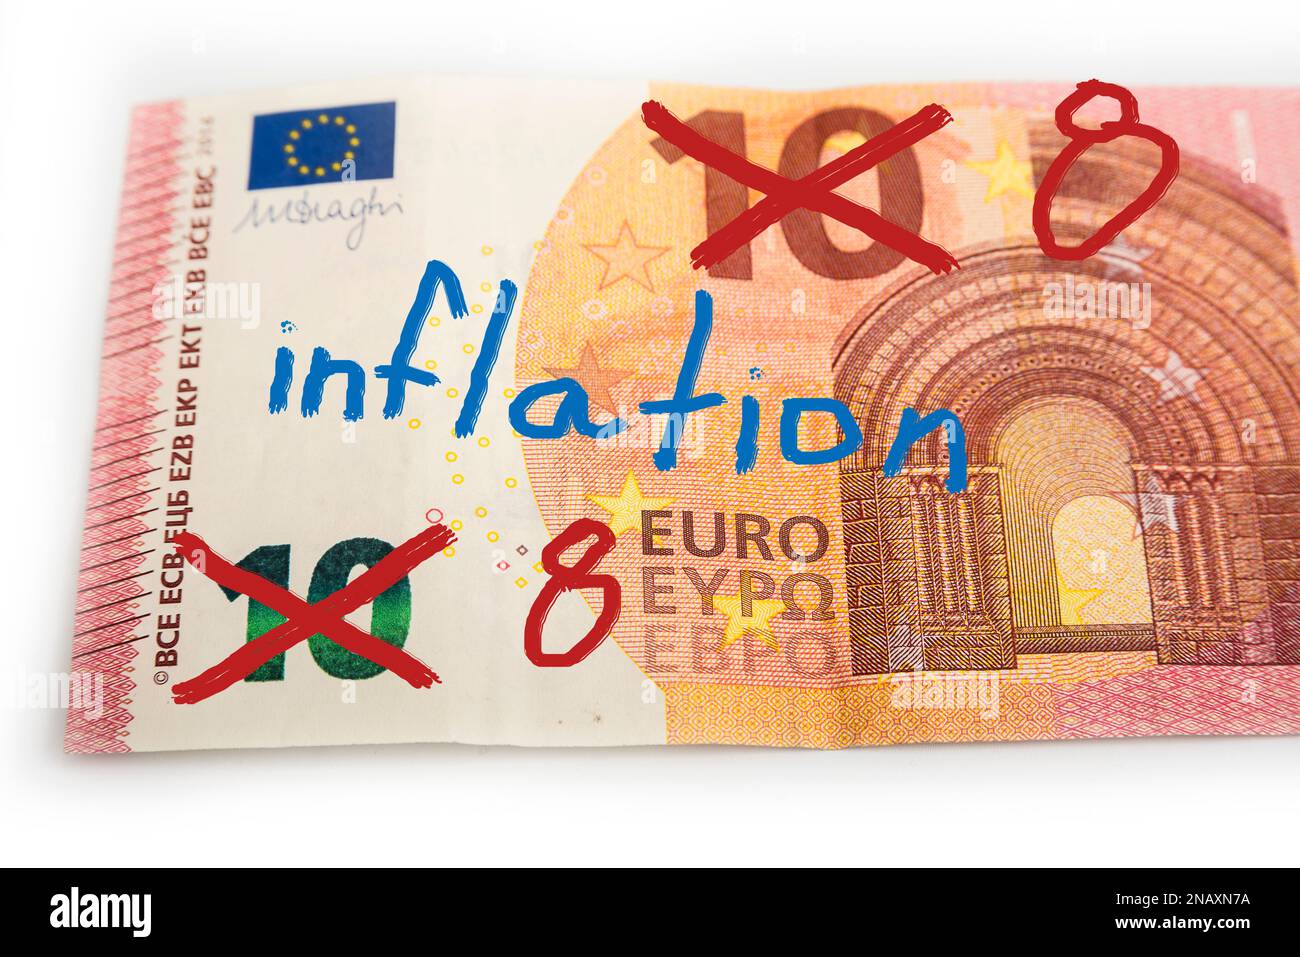 Inflation on the paper banknote. Devaluation of money Stock Photo